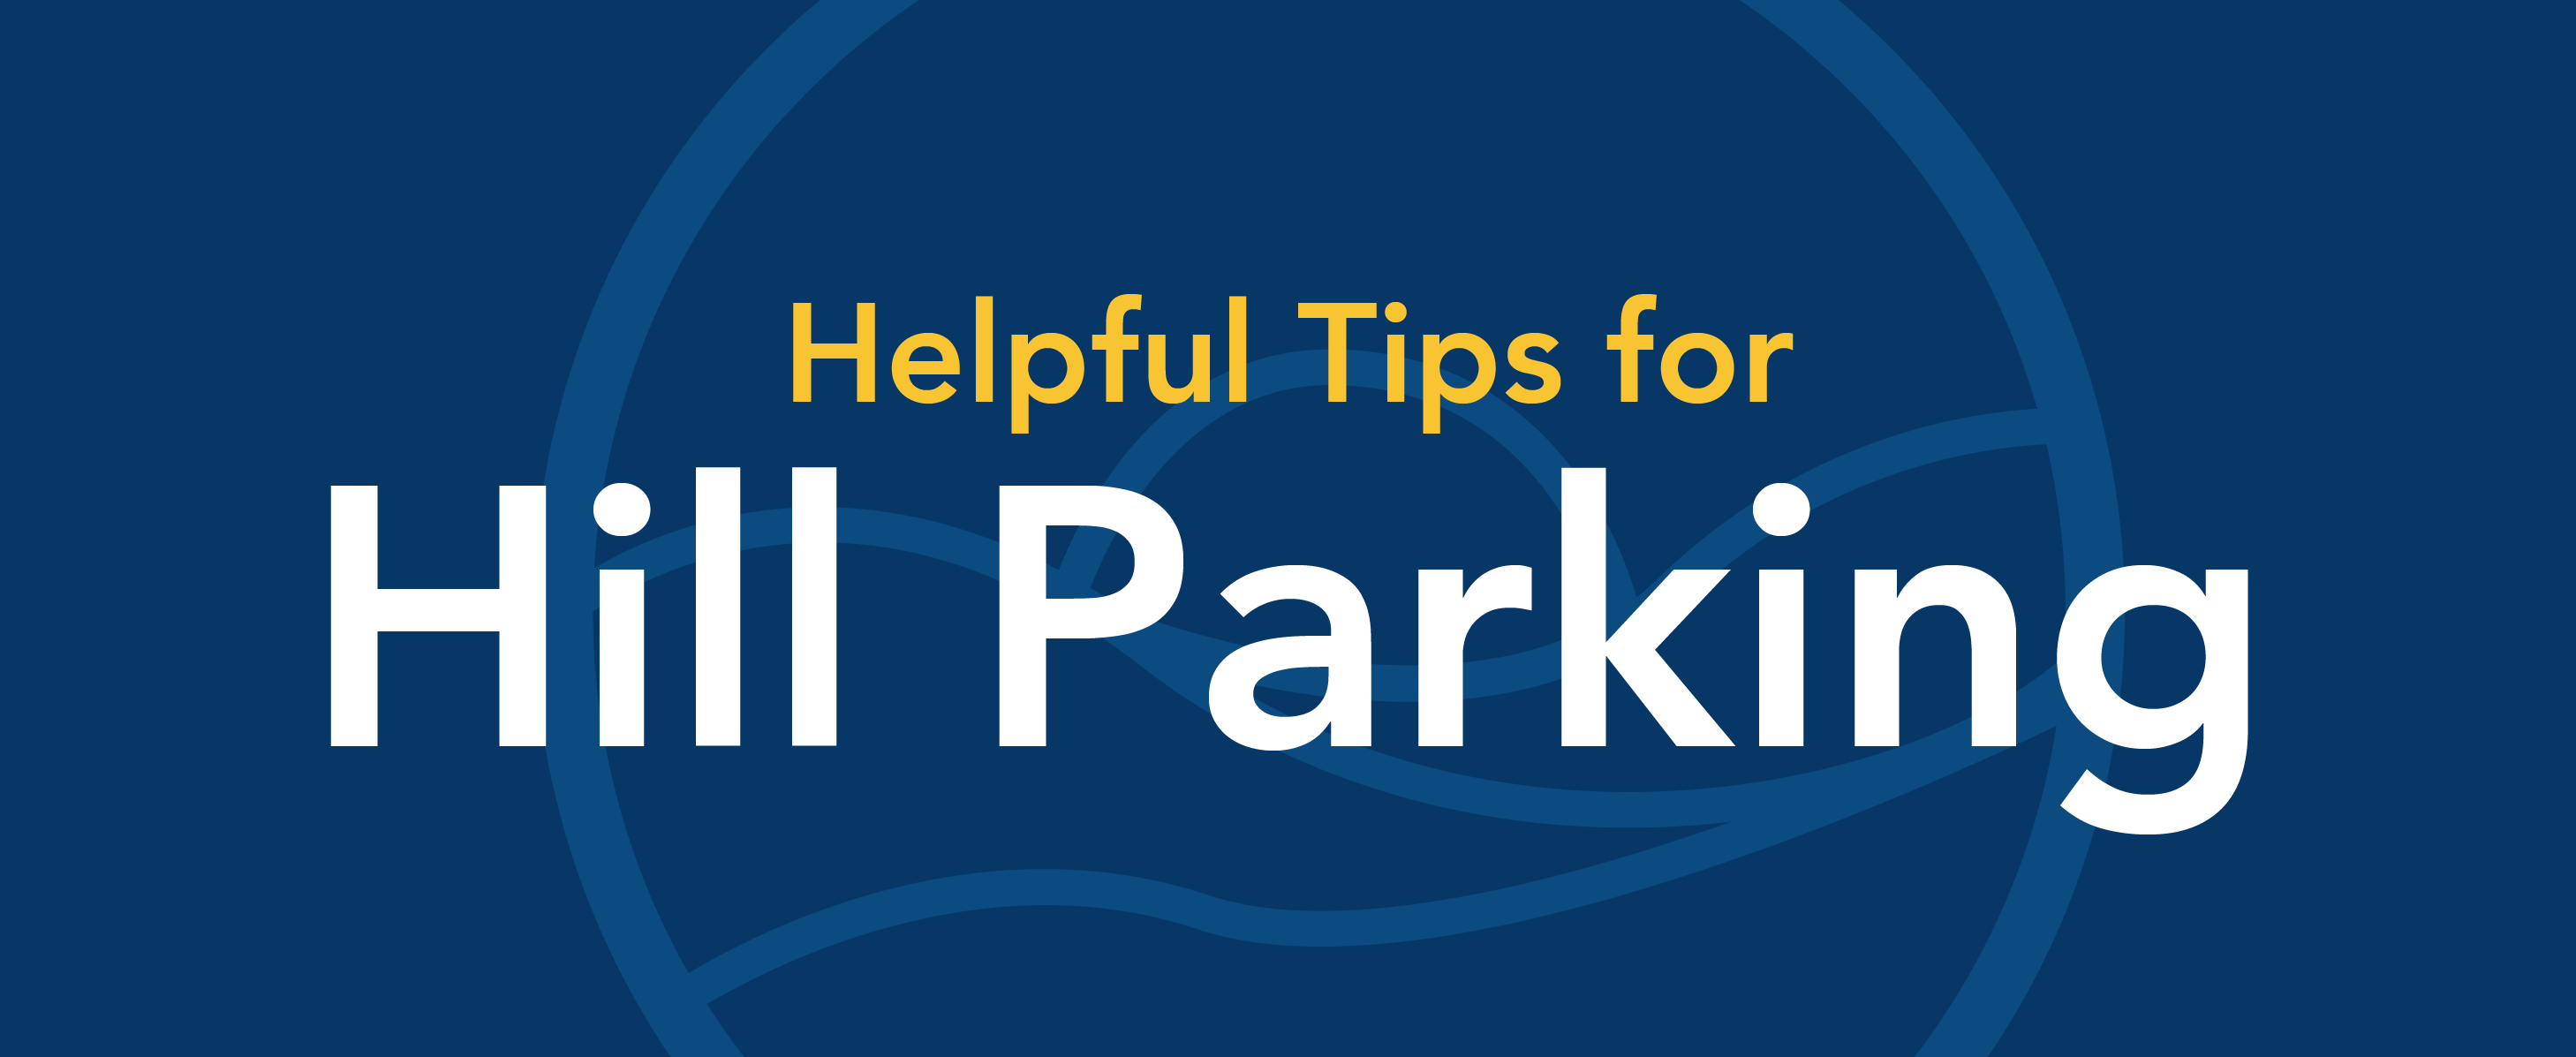 Helpful tips for hill parking.